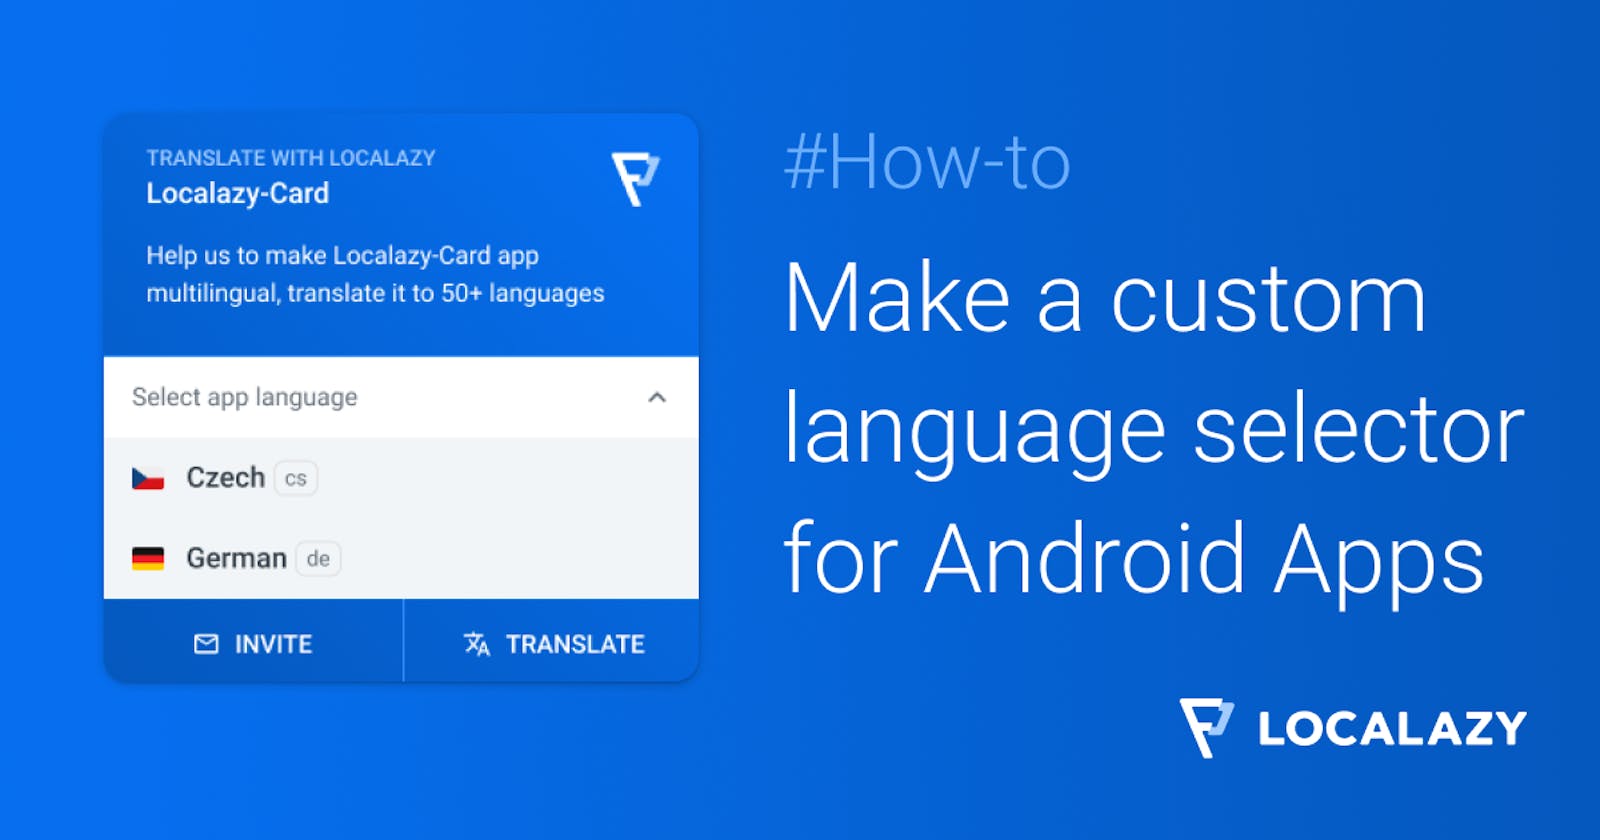 How to create a custom language selector for Android apps